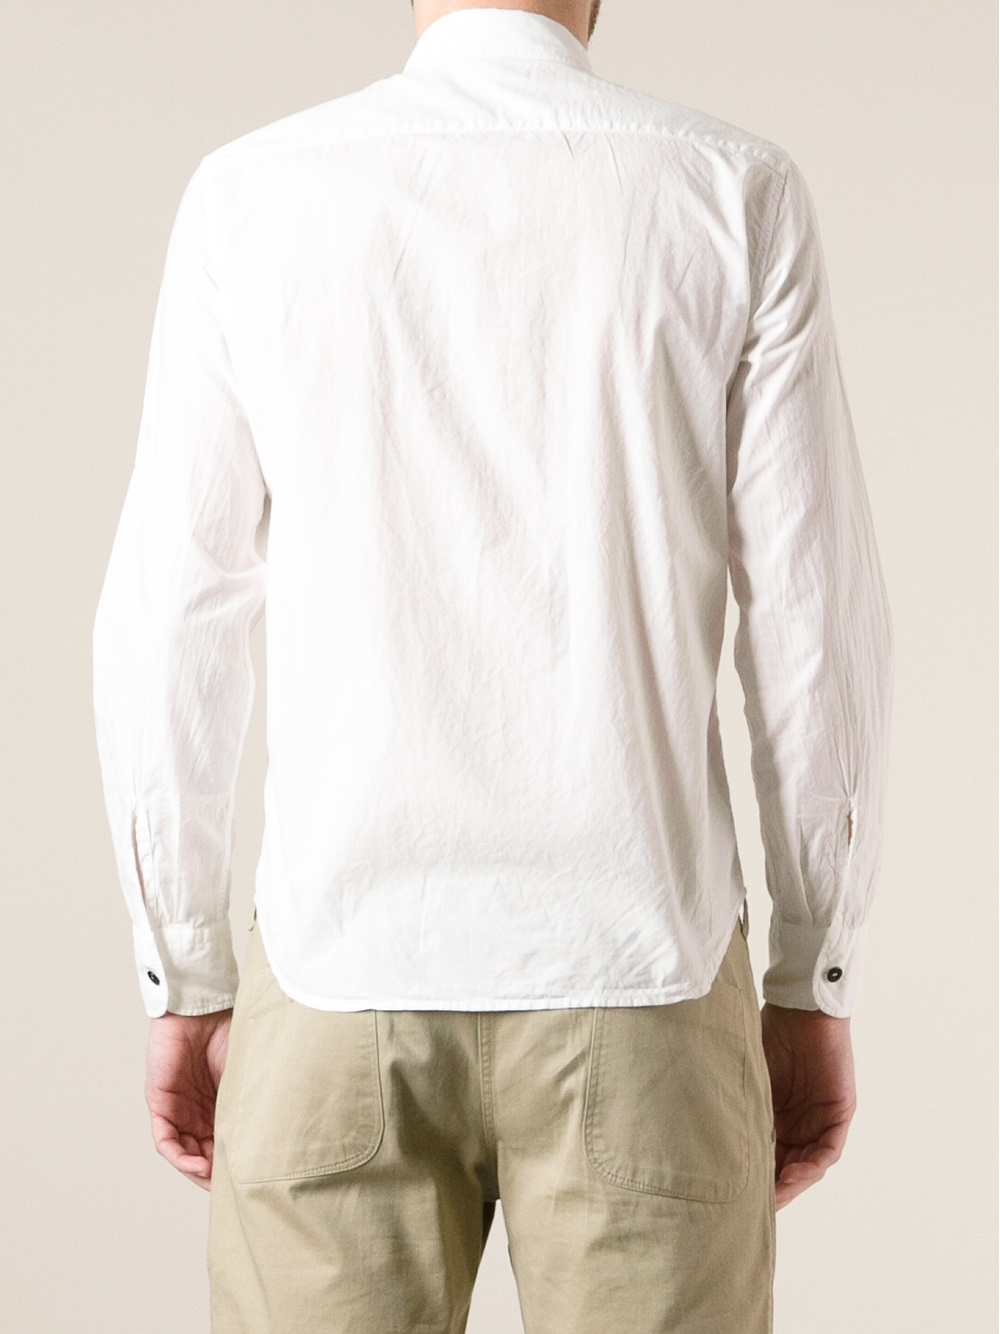 Stone island Creased Shirt in White for Men | Lyst